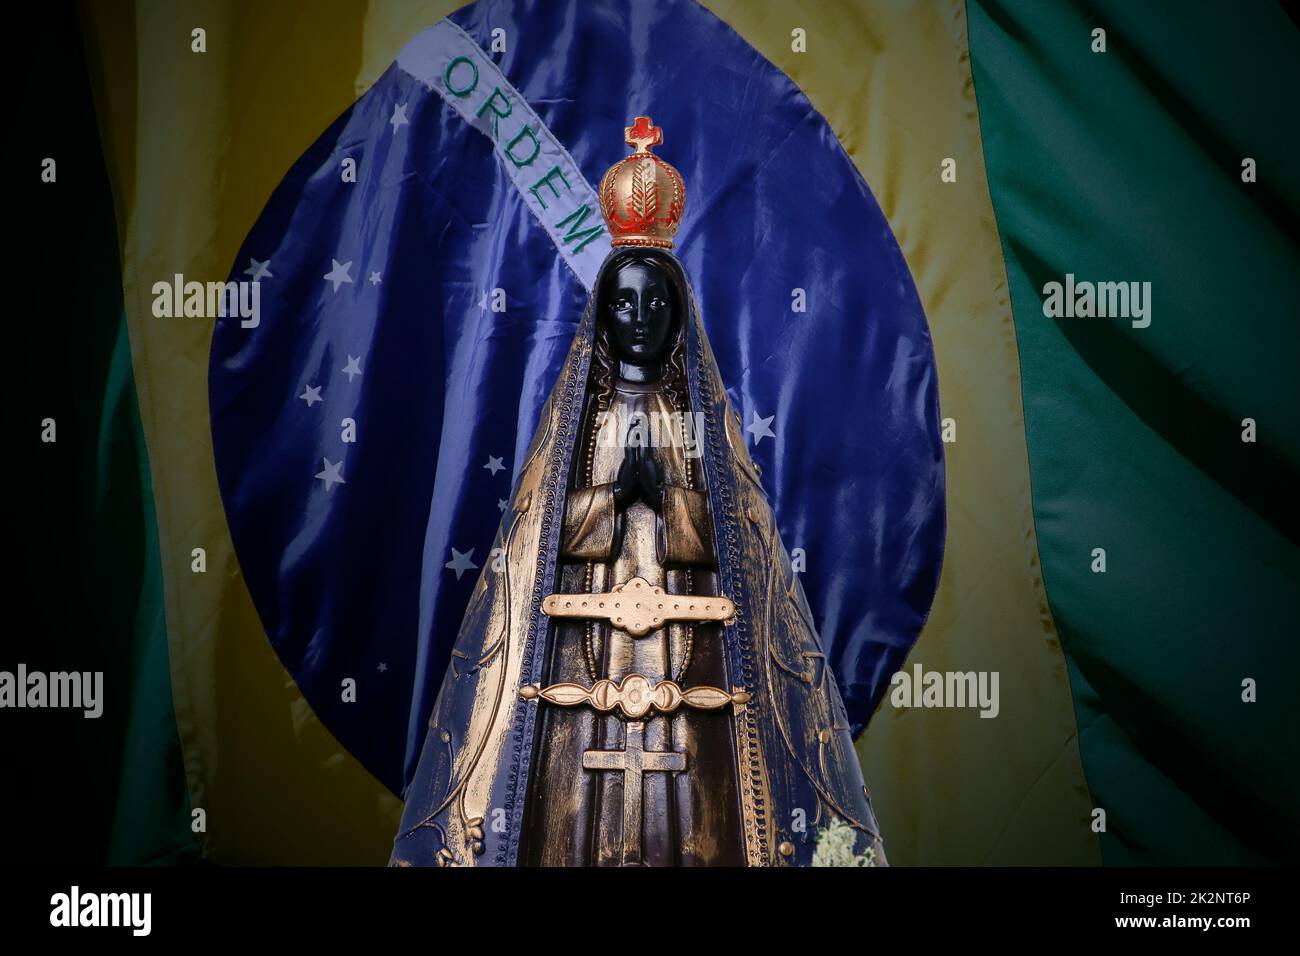 Statue of the image of Our Lady of Aparecida, mother of God in the Catholic religion, patroness of Brazil and Brazil flag Stock Photo